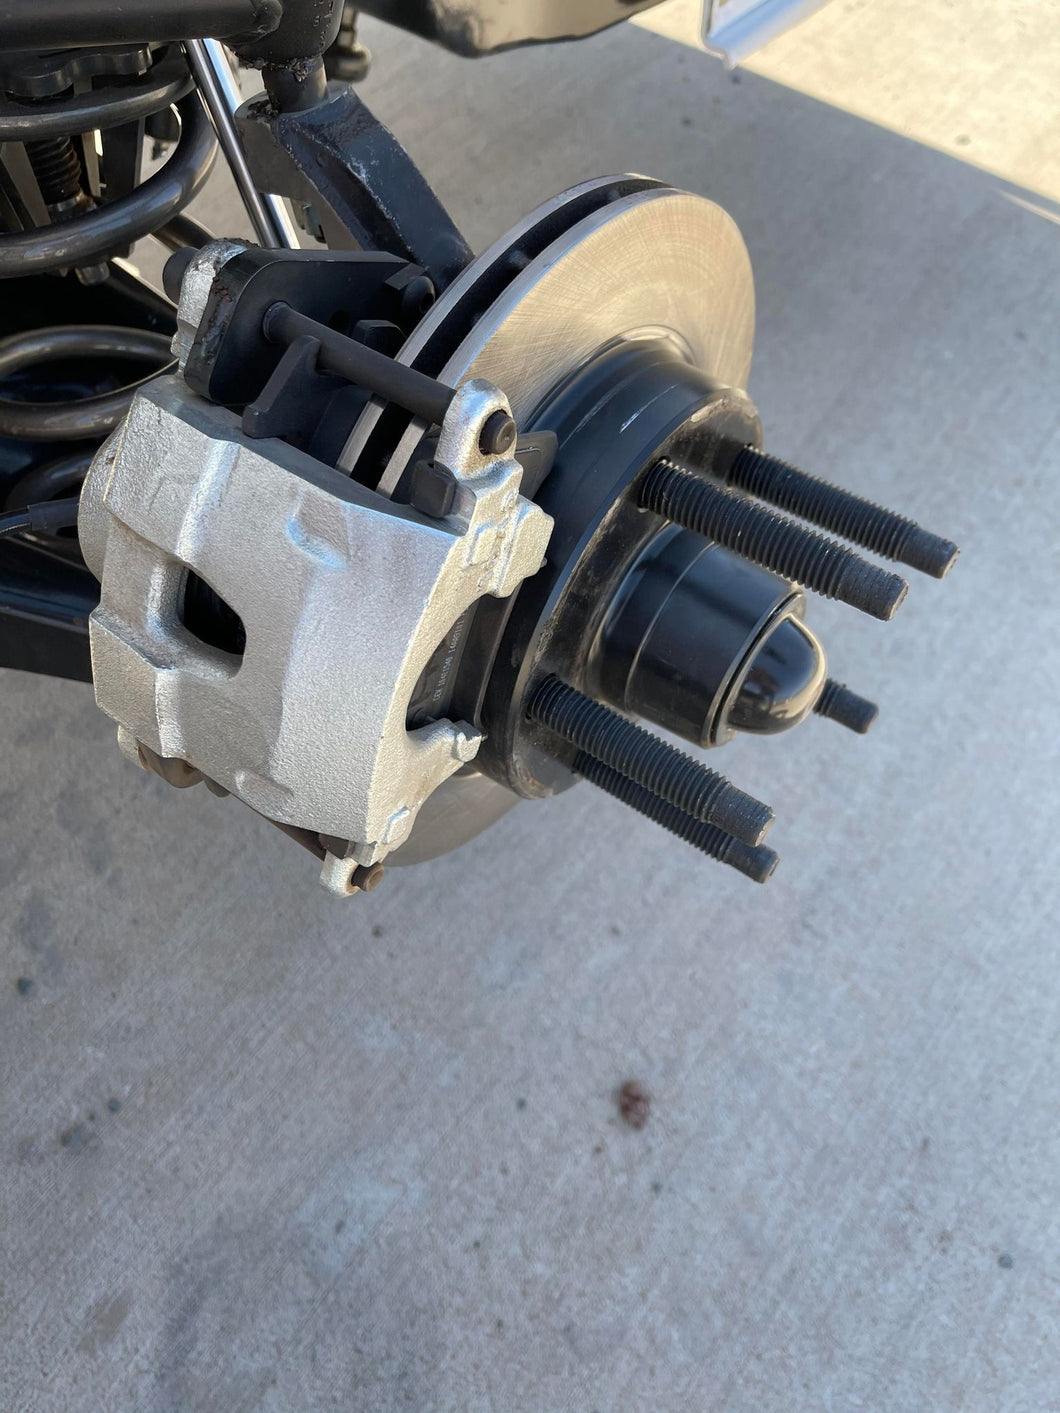 A hub rotor installed on a dirt modified showing the brake caliper